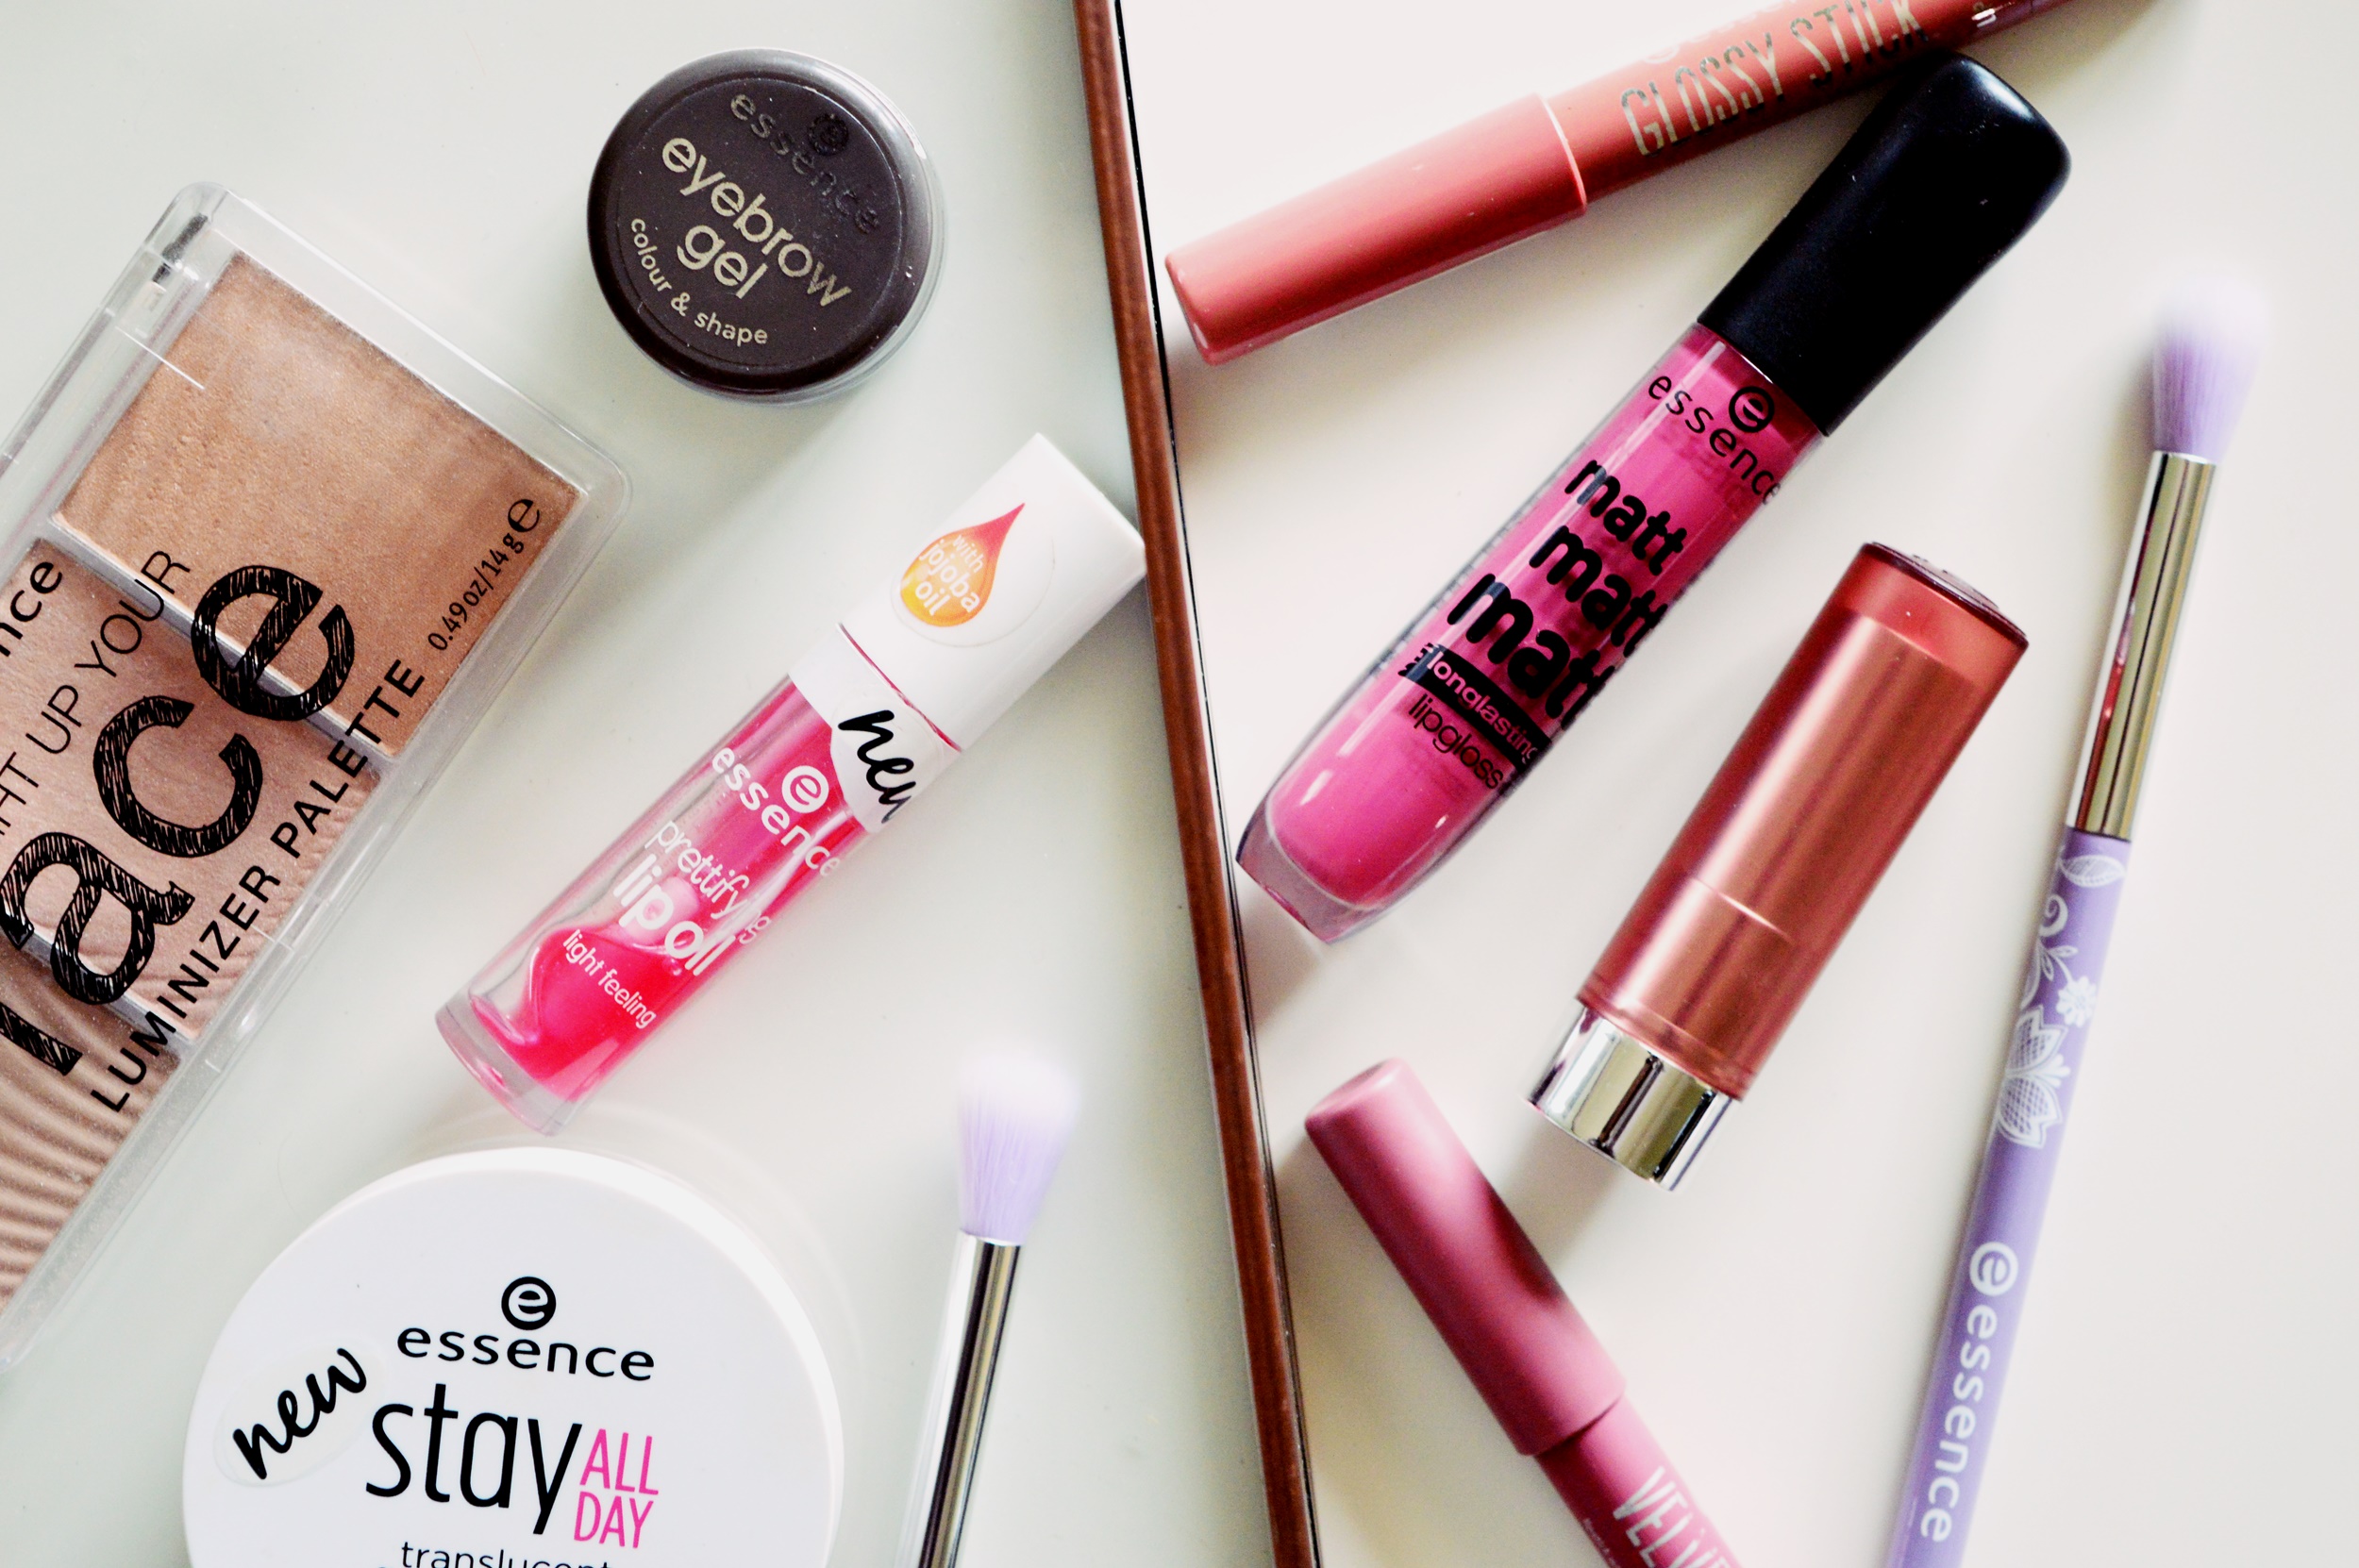 My ultimate make-up picks from essence {SERIES}